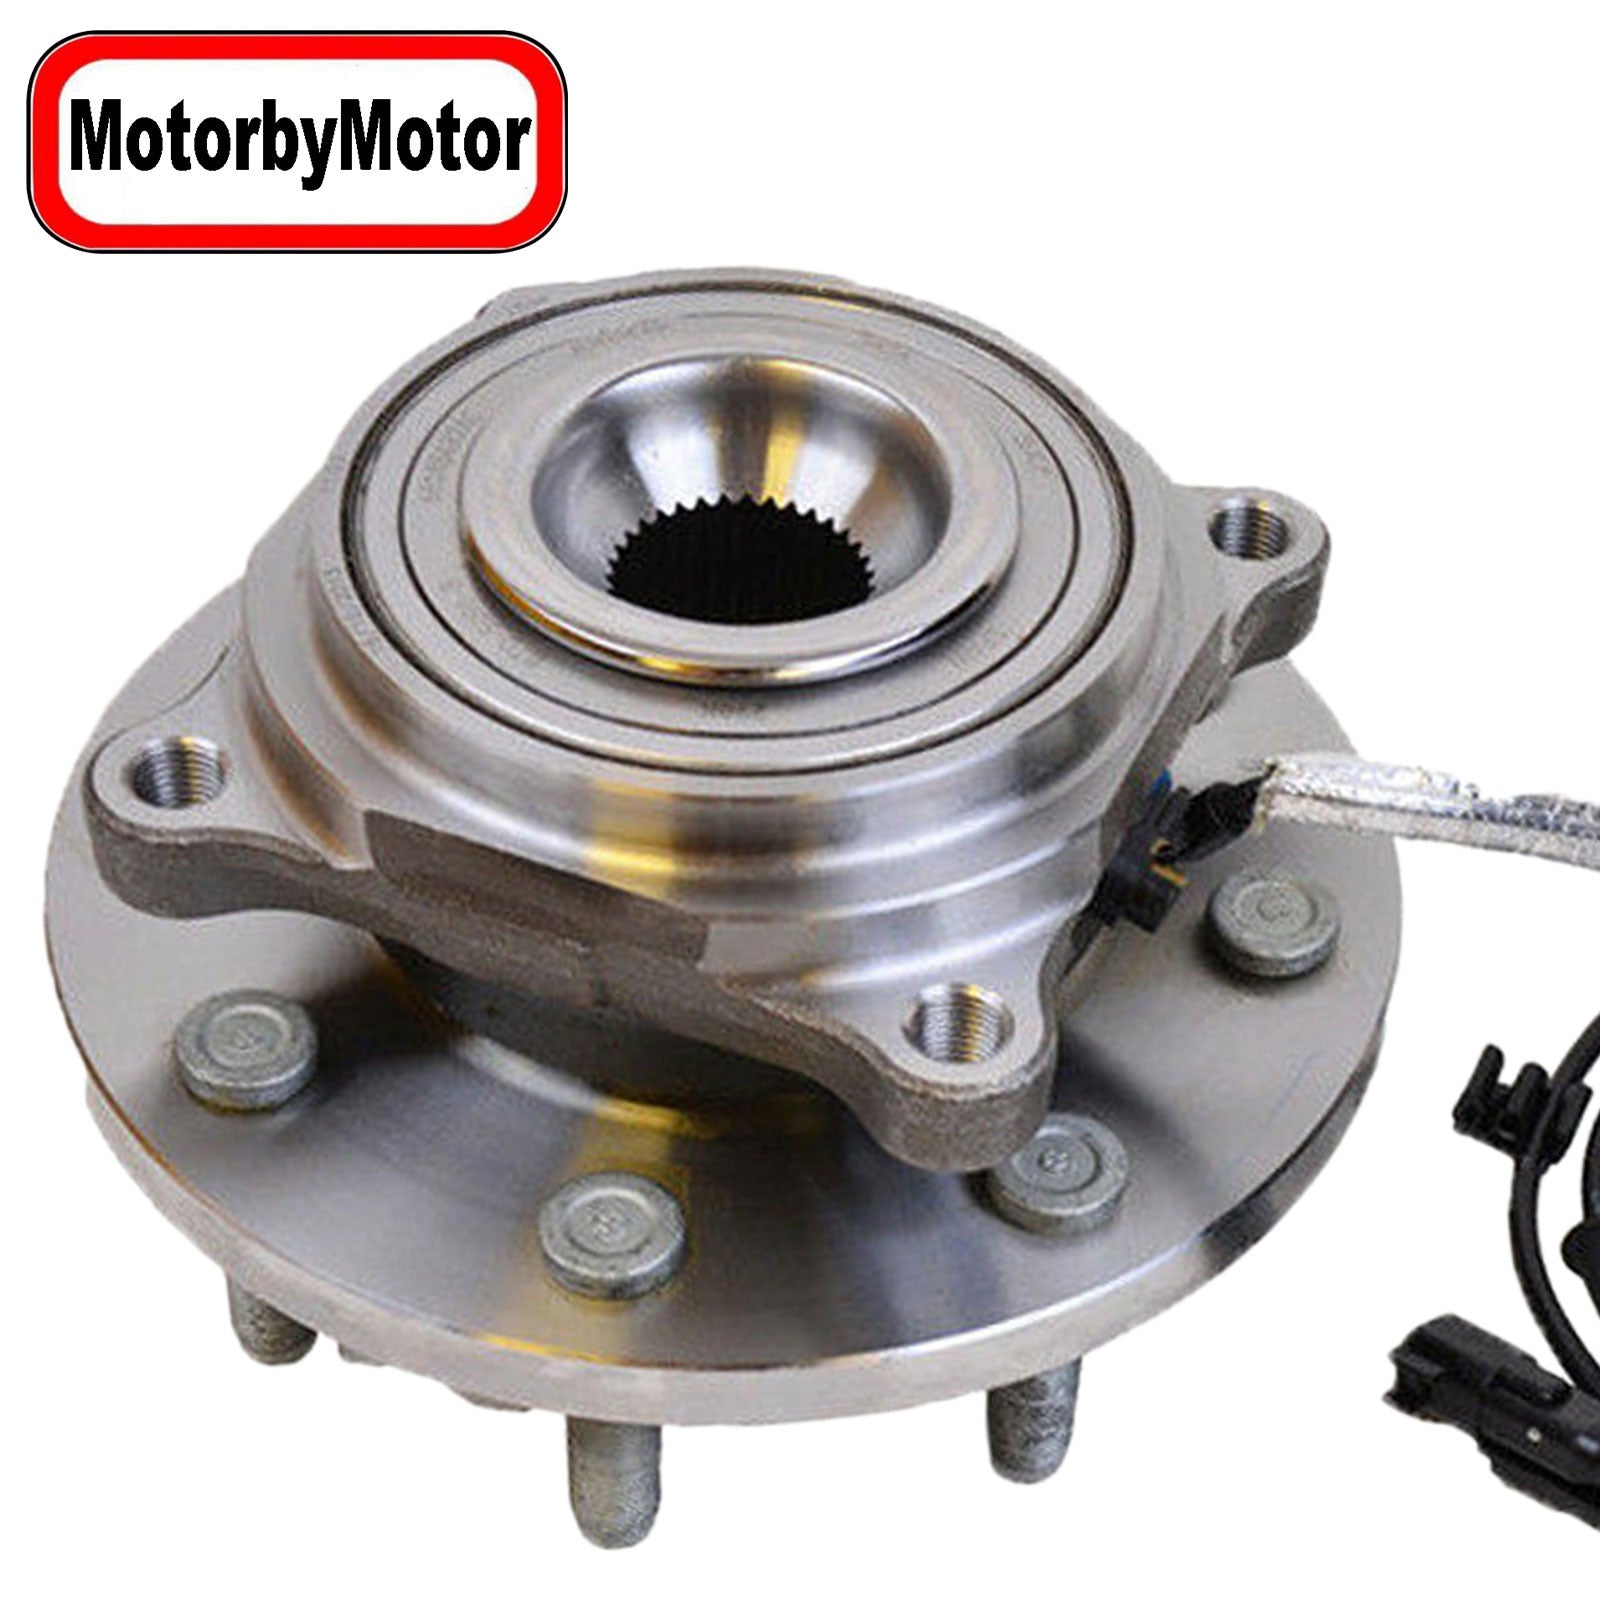 MotorbyMotor 515162 Front Heavy Duty Wheel Bearing Assembly with 8 Lugs Fits for 2014-2018 Ram 2500, 2013-2018 Ram 3500 Wheel Bearing and Hub Assembly (w/ABS, All Models) MotorbyMotor